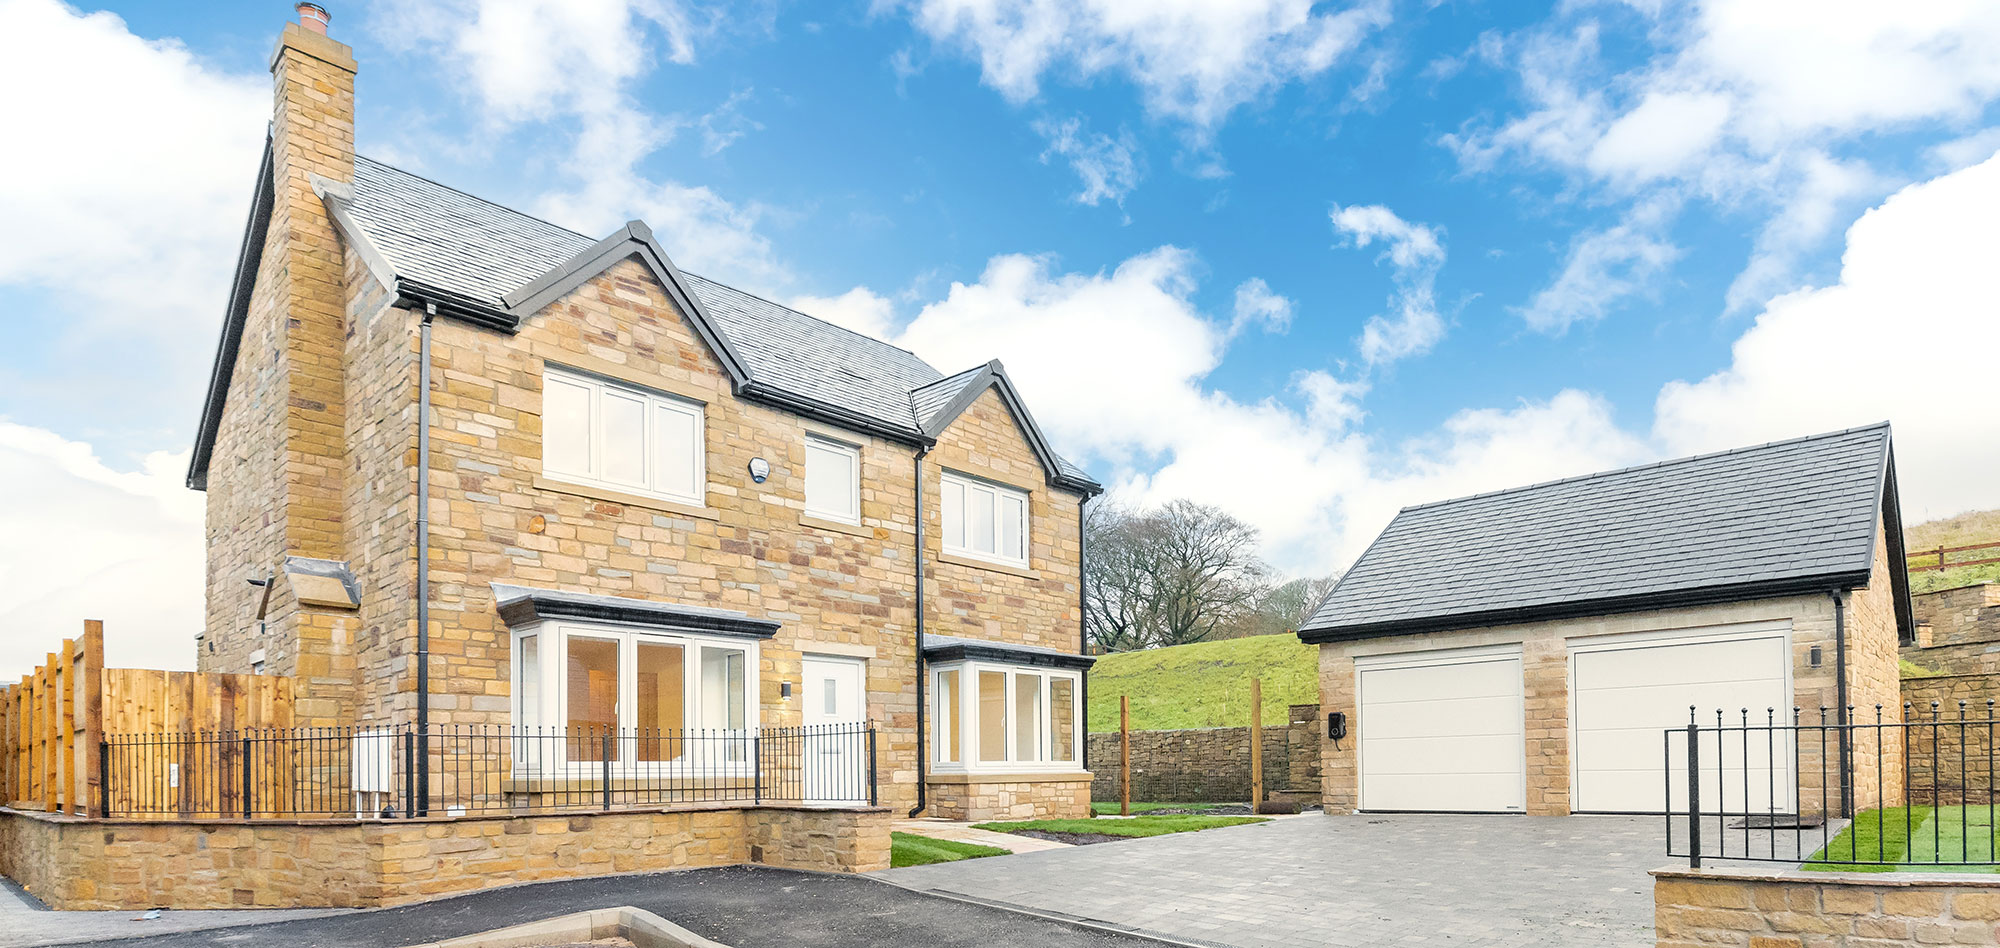 Timeless contemporary living in historic Lancashire